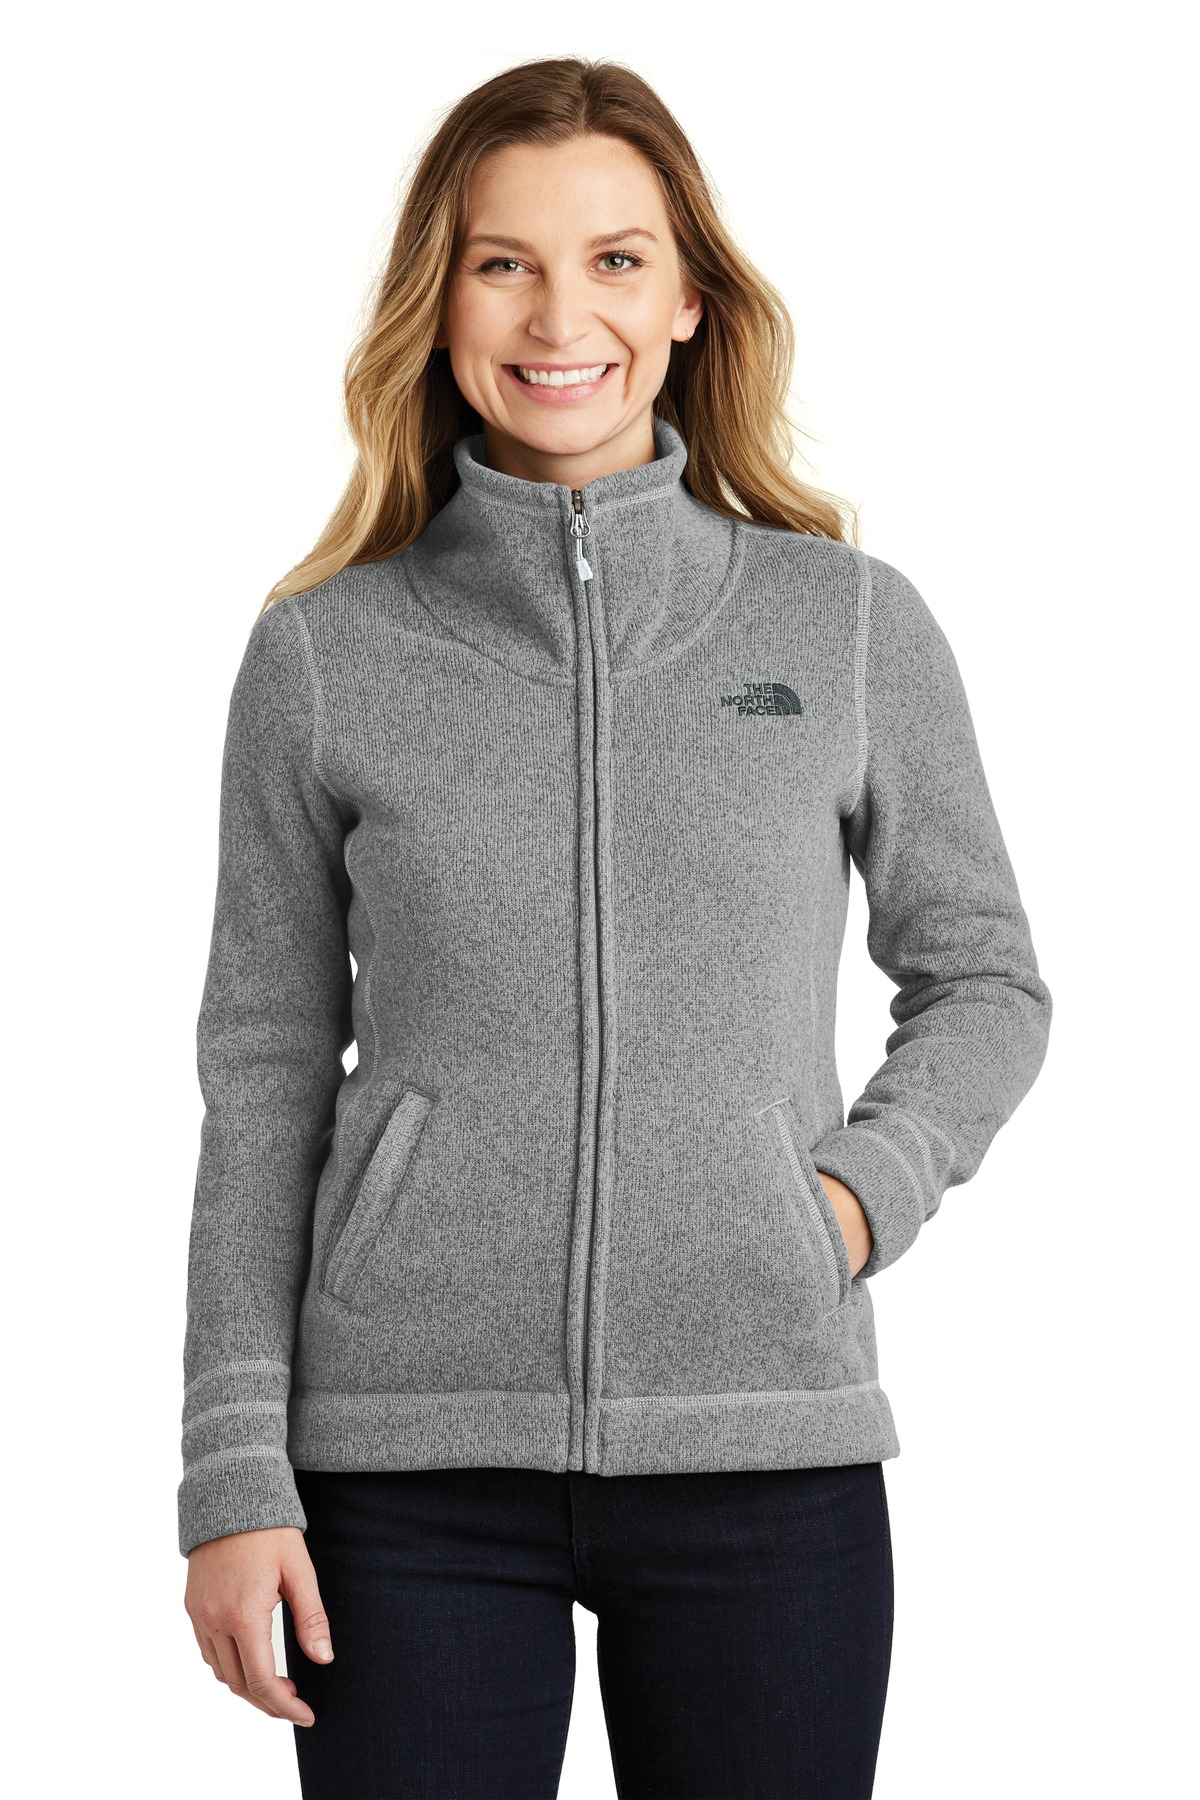 The North Face  Ladies Sweater Fleece Jacket. NF0A3LH8